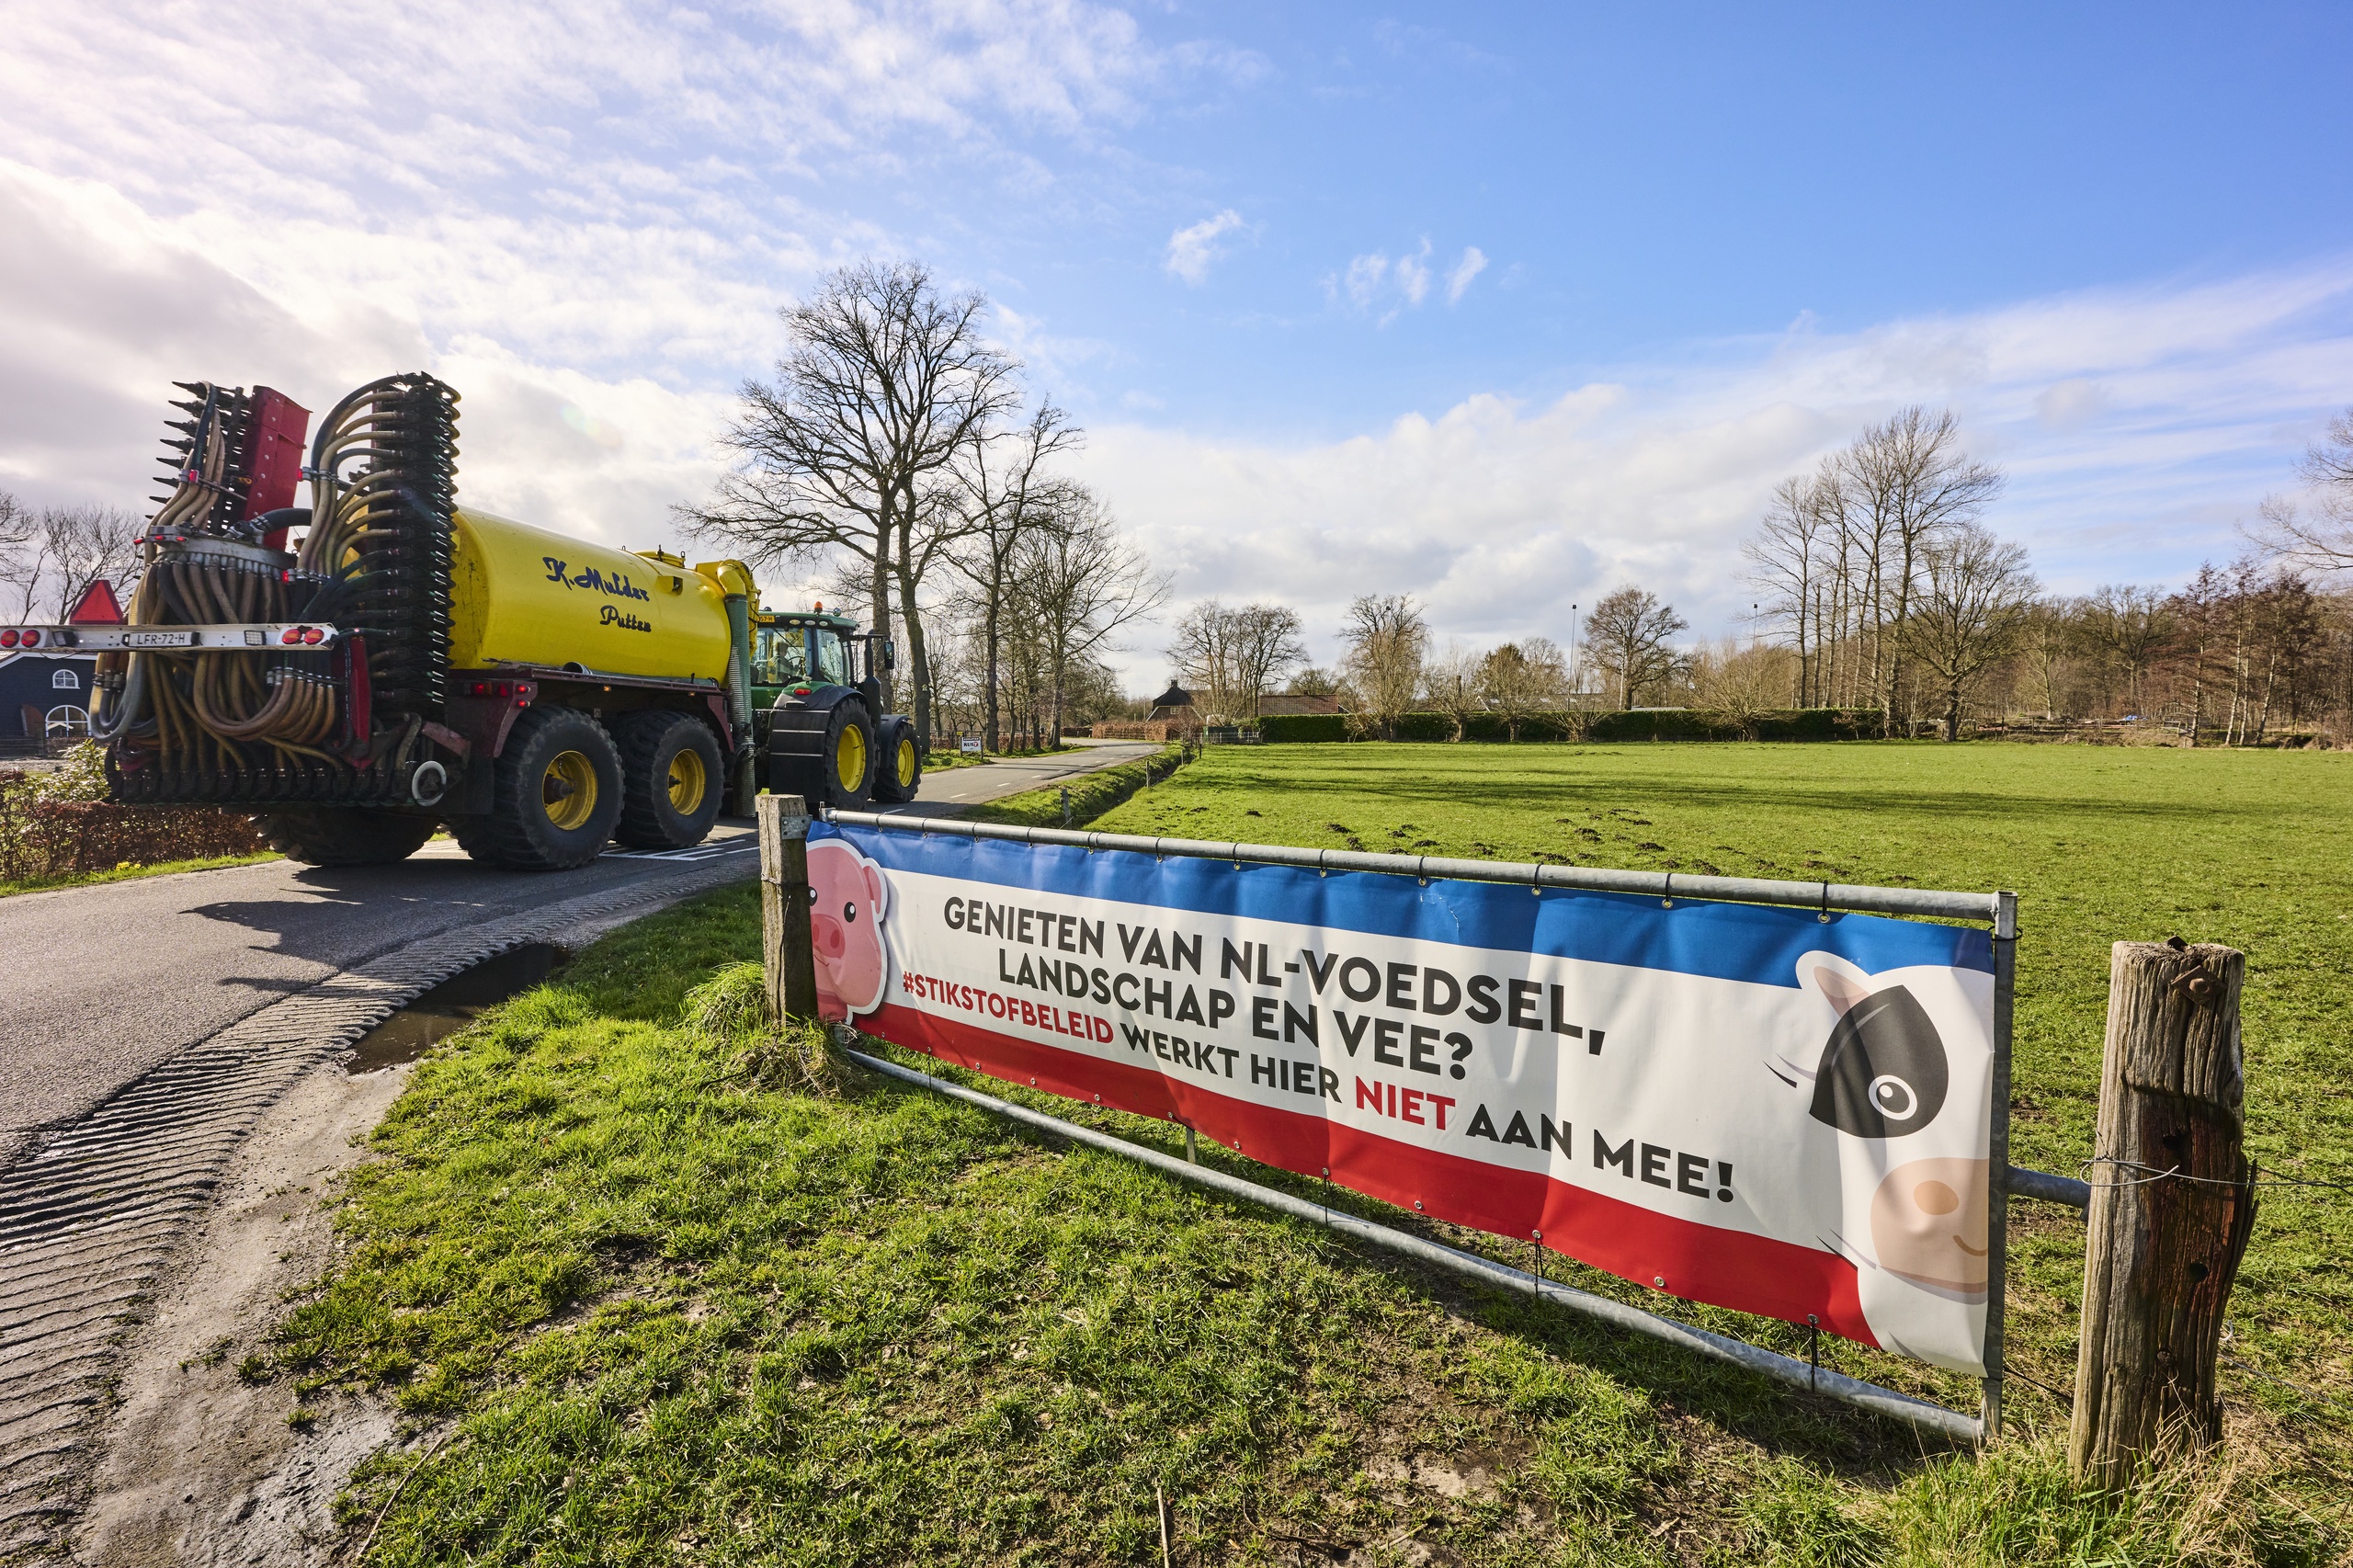 Chairman Sjaak van der Tak, of LTO-Nederland, believes that the cabinet has set 'goals that are too high' with the current nitrogen policy. 